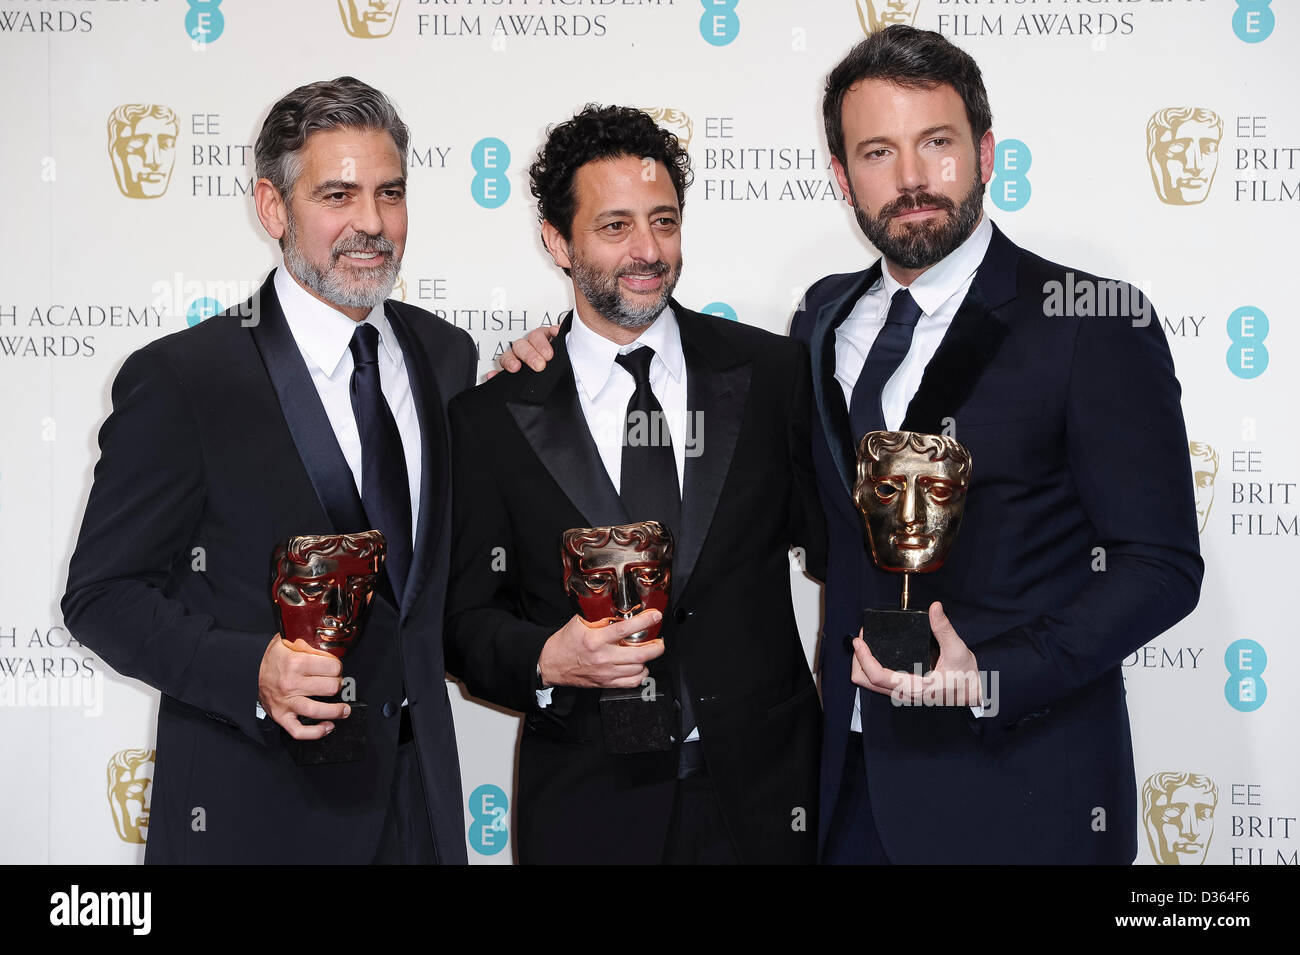 London, UK. Feb 10th, 2013. Best Film winners George Clooney, Grant Heslov and Ben Affleck pose in the Press Room at the EE British Academy Film Awards at The Royal Opera House on February 10, 2013 in London, England. Credit: London Entertainment/Alamy Live News Stock Photo